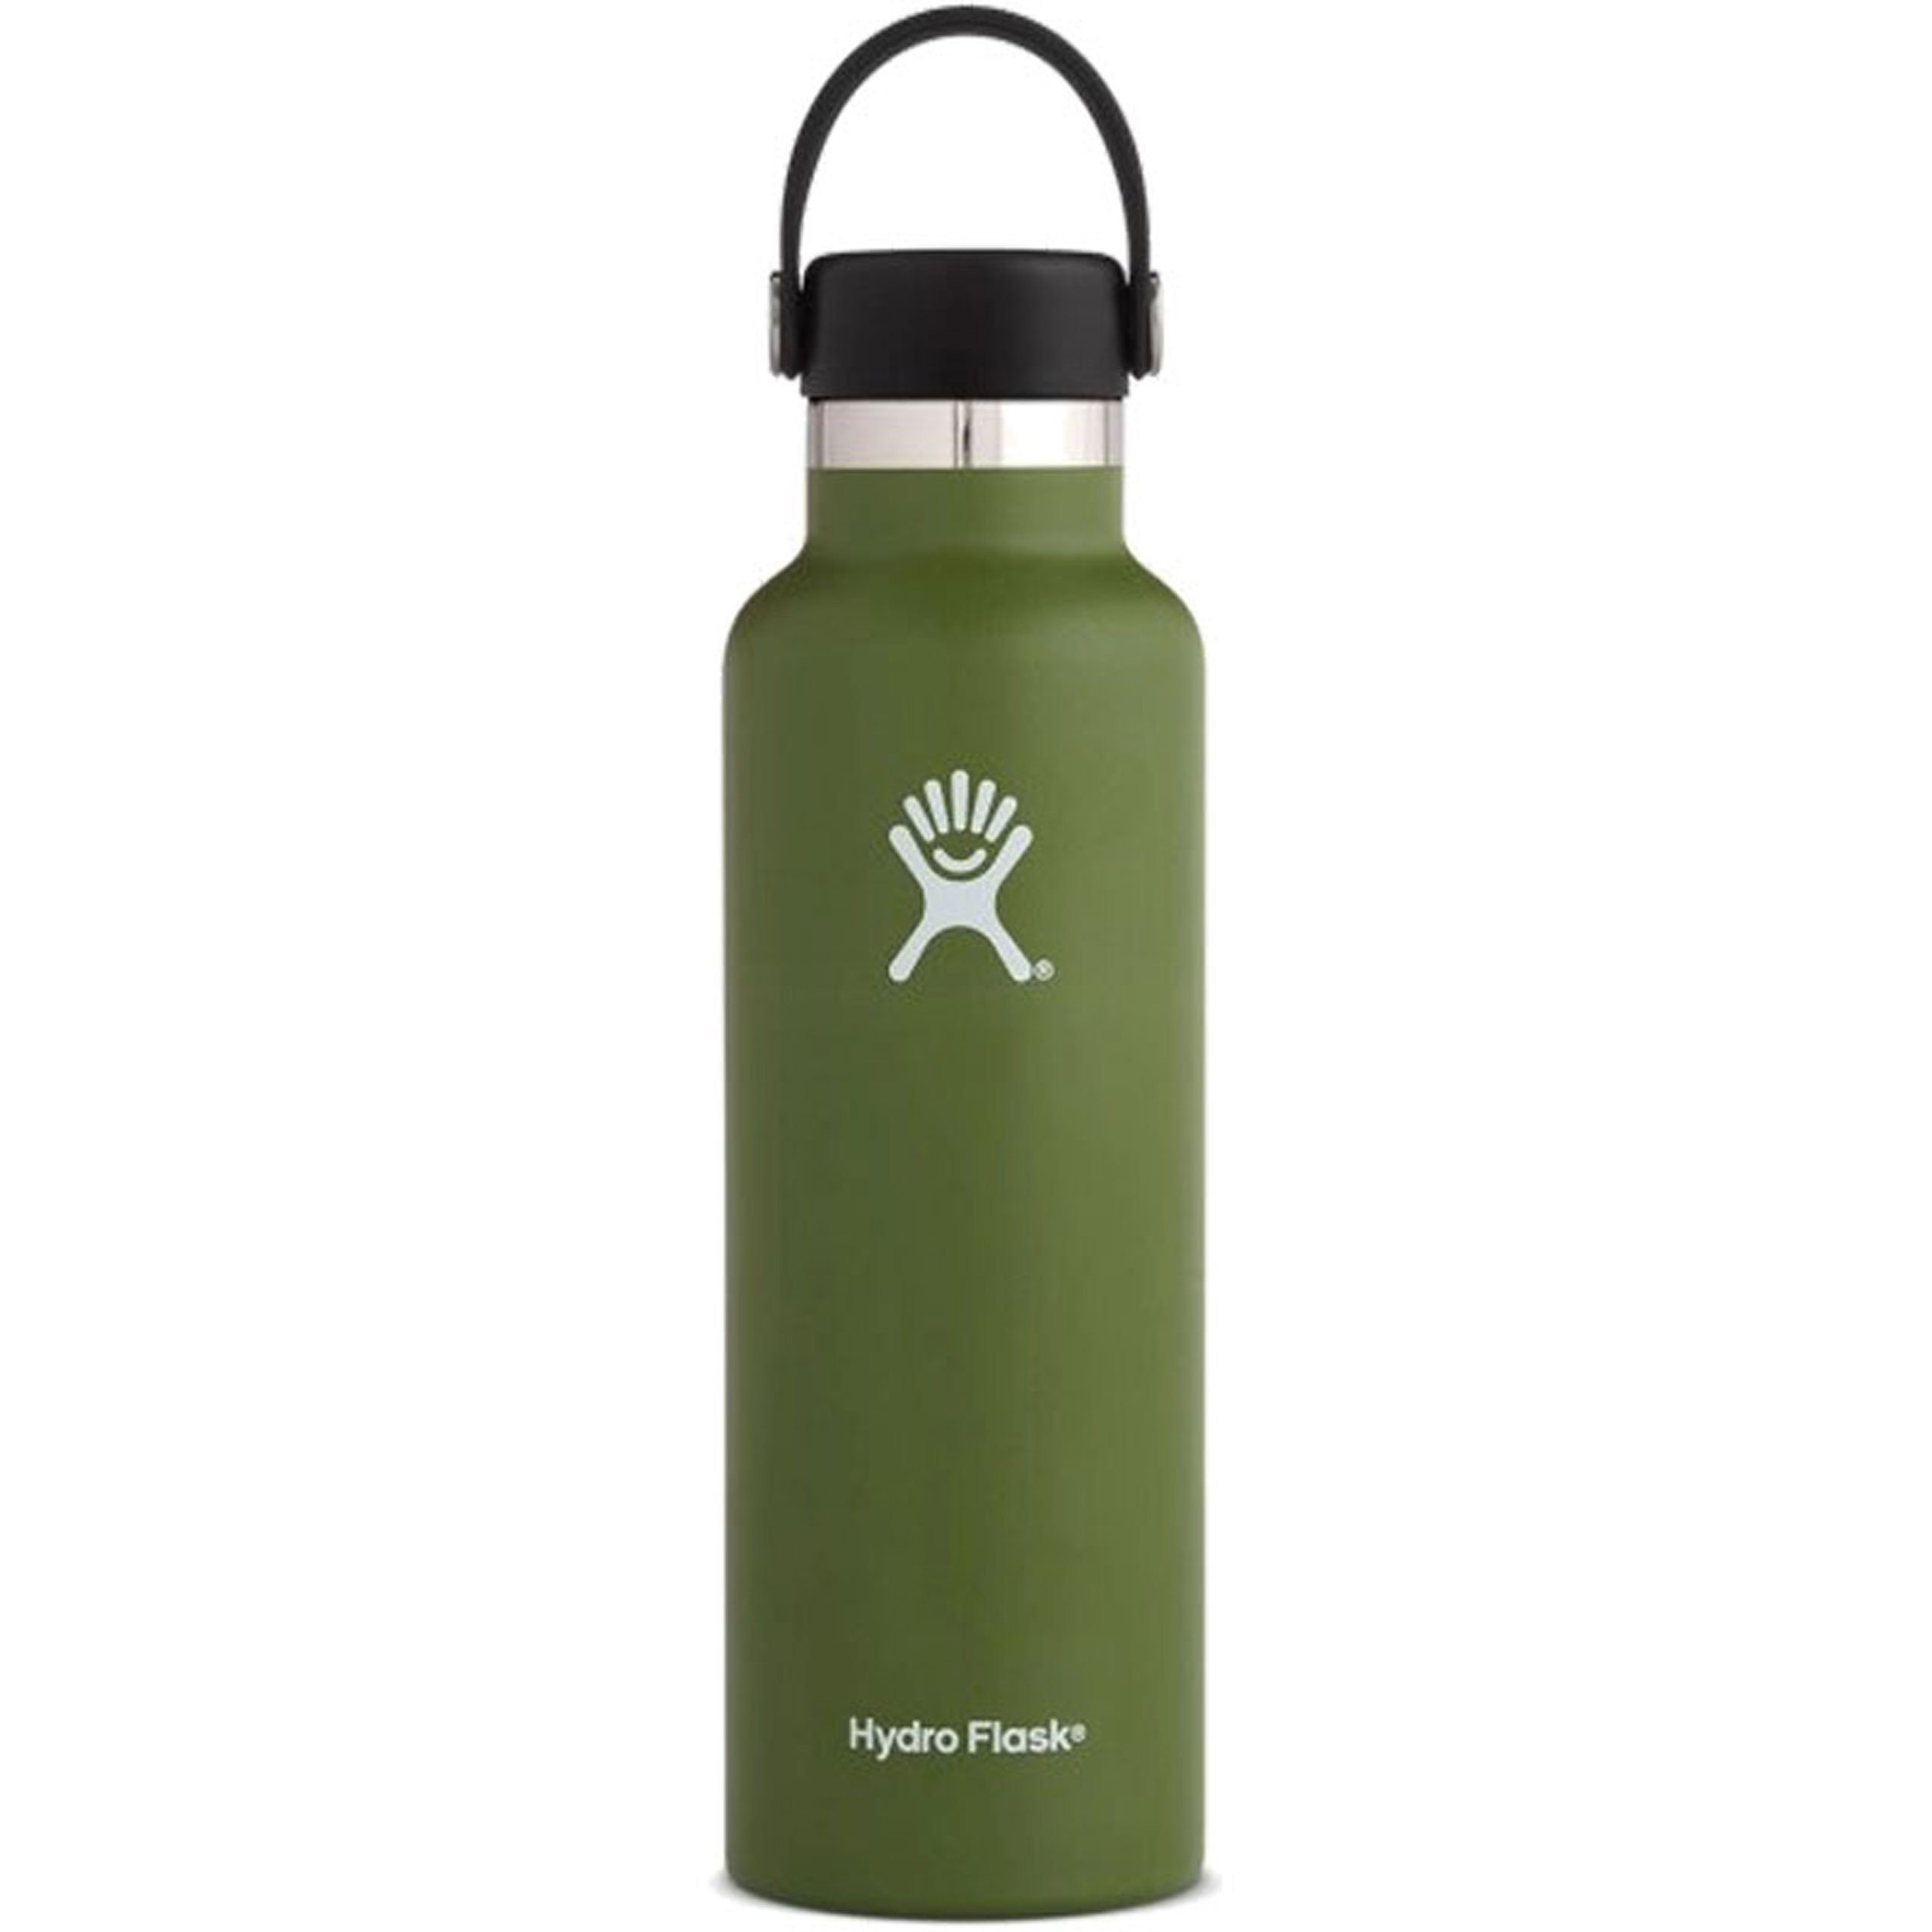 Hydro Flask Isolierflasche Hydro Flask Bottle Standard Mouth - Isolierflasche/Thermoflasche olive